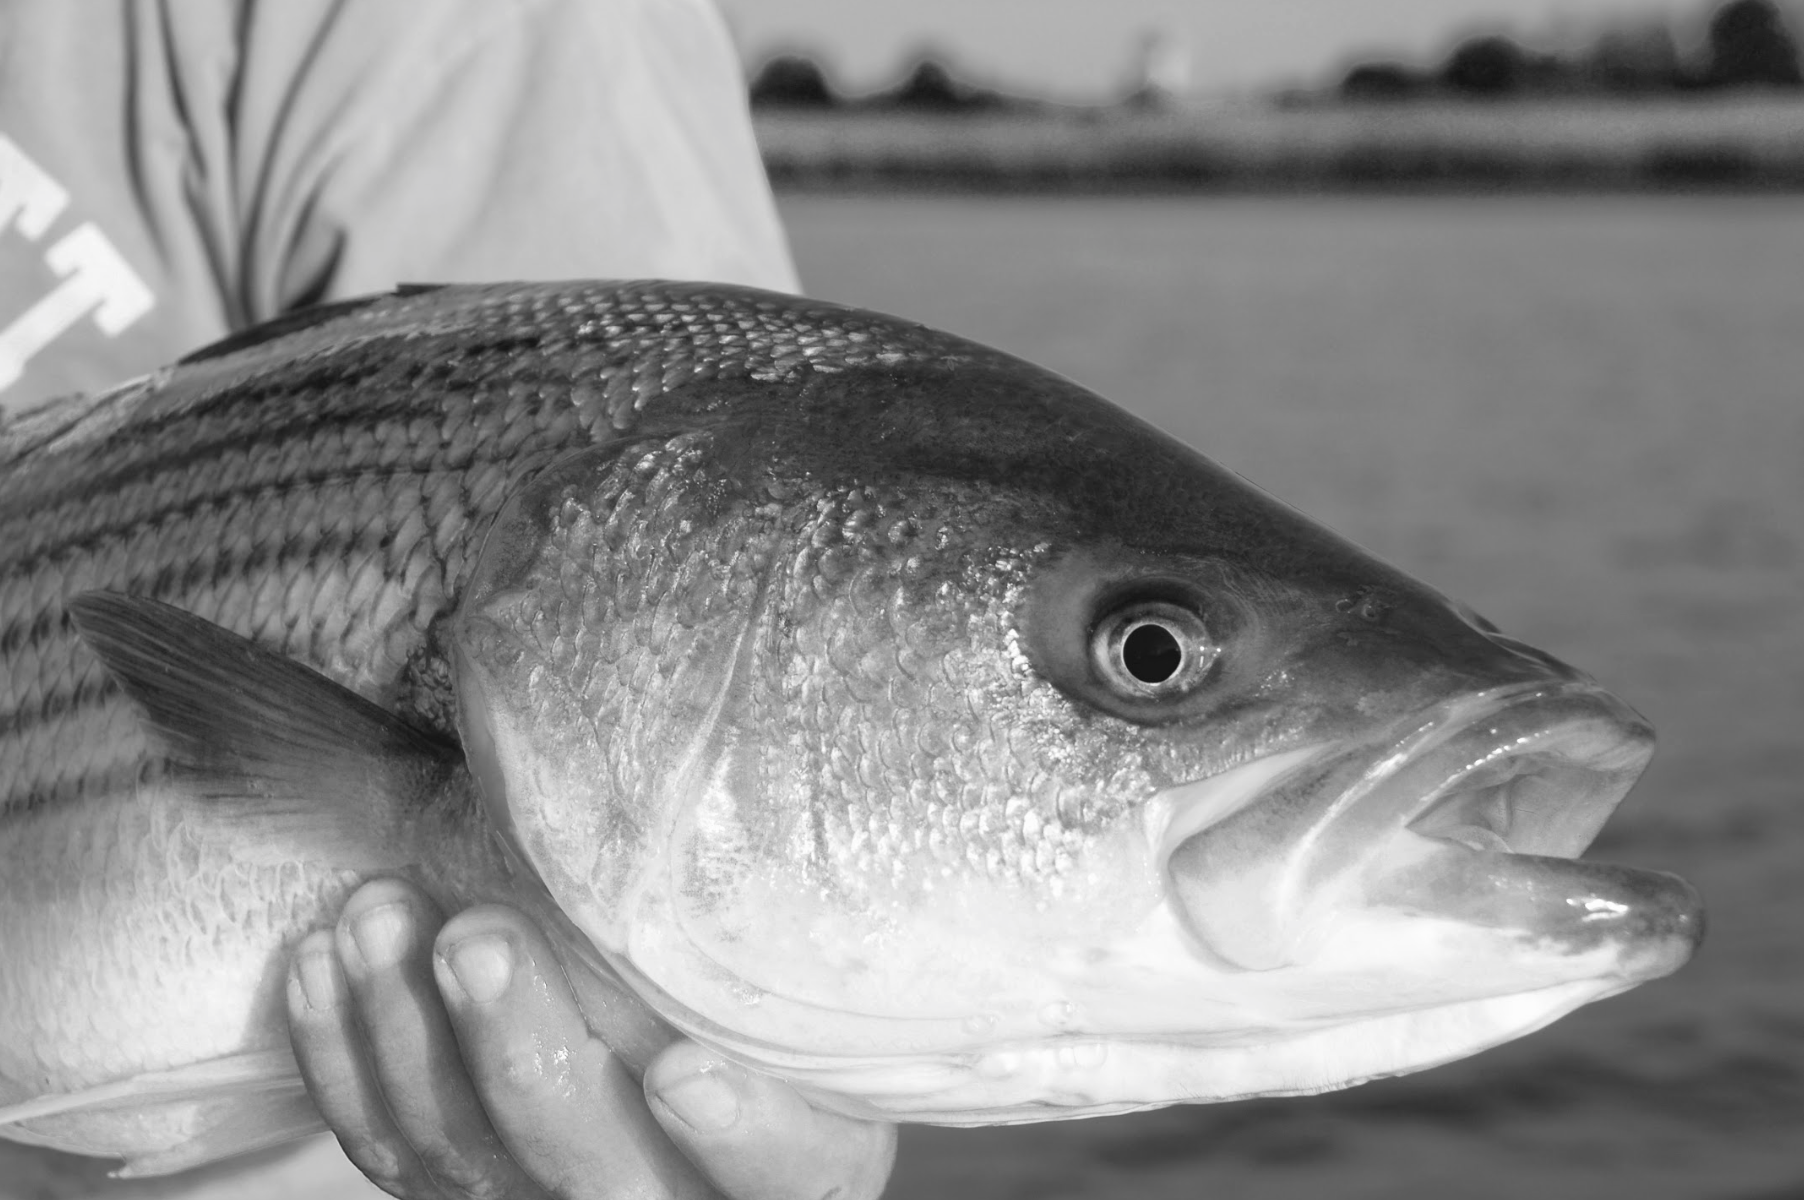 THE DECLINE OF THE STRIPED BASS